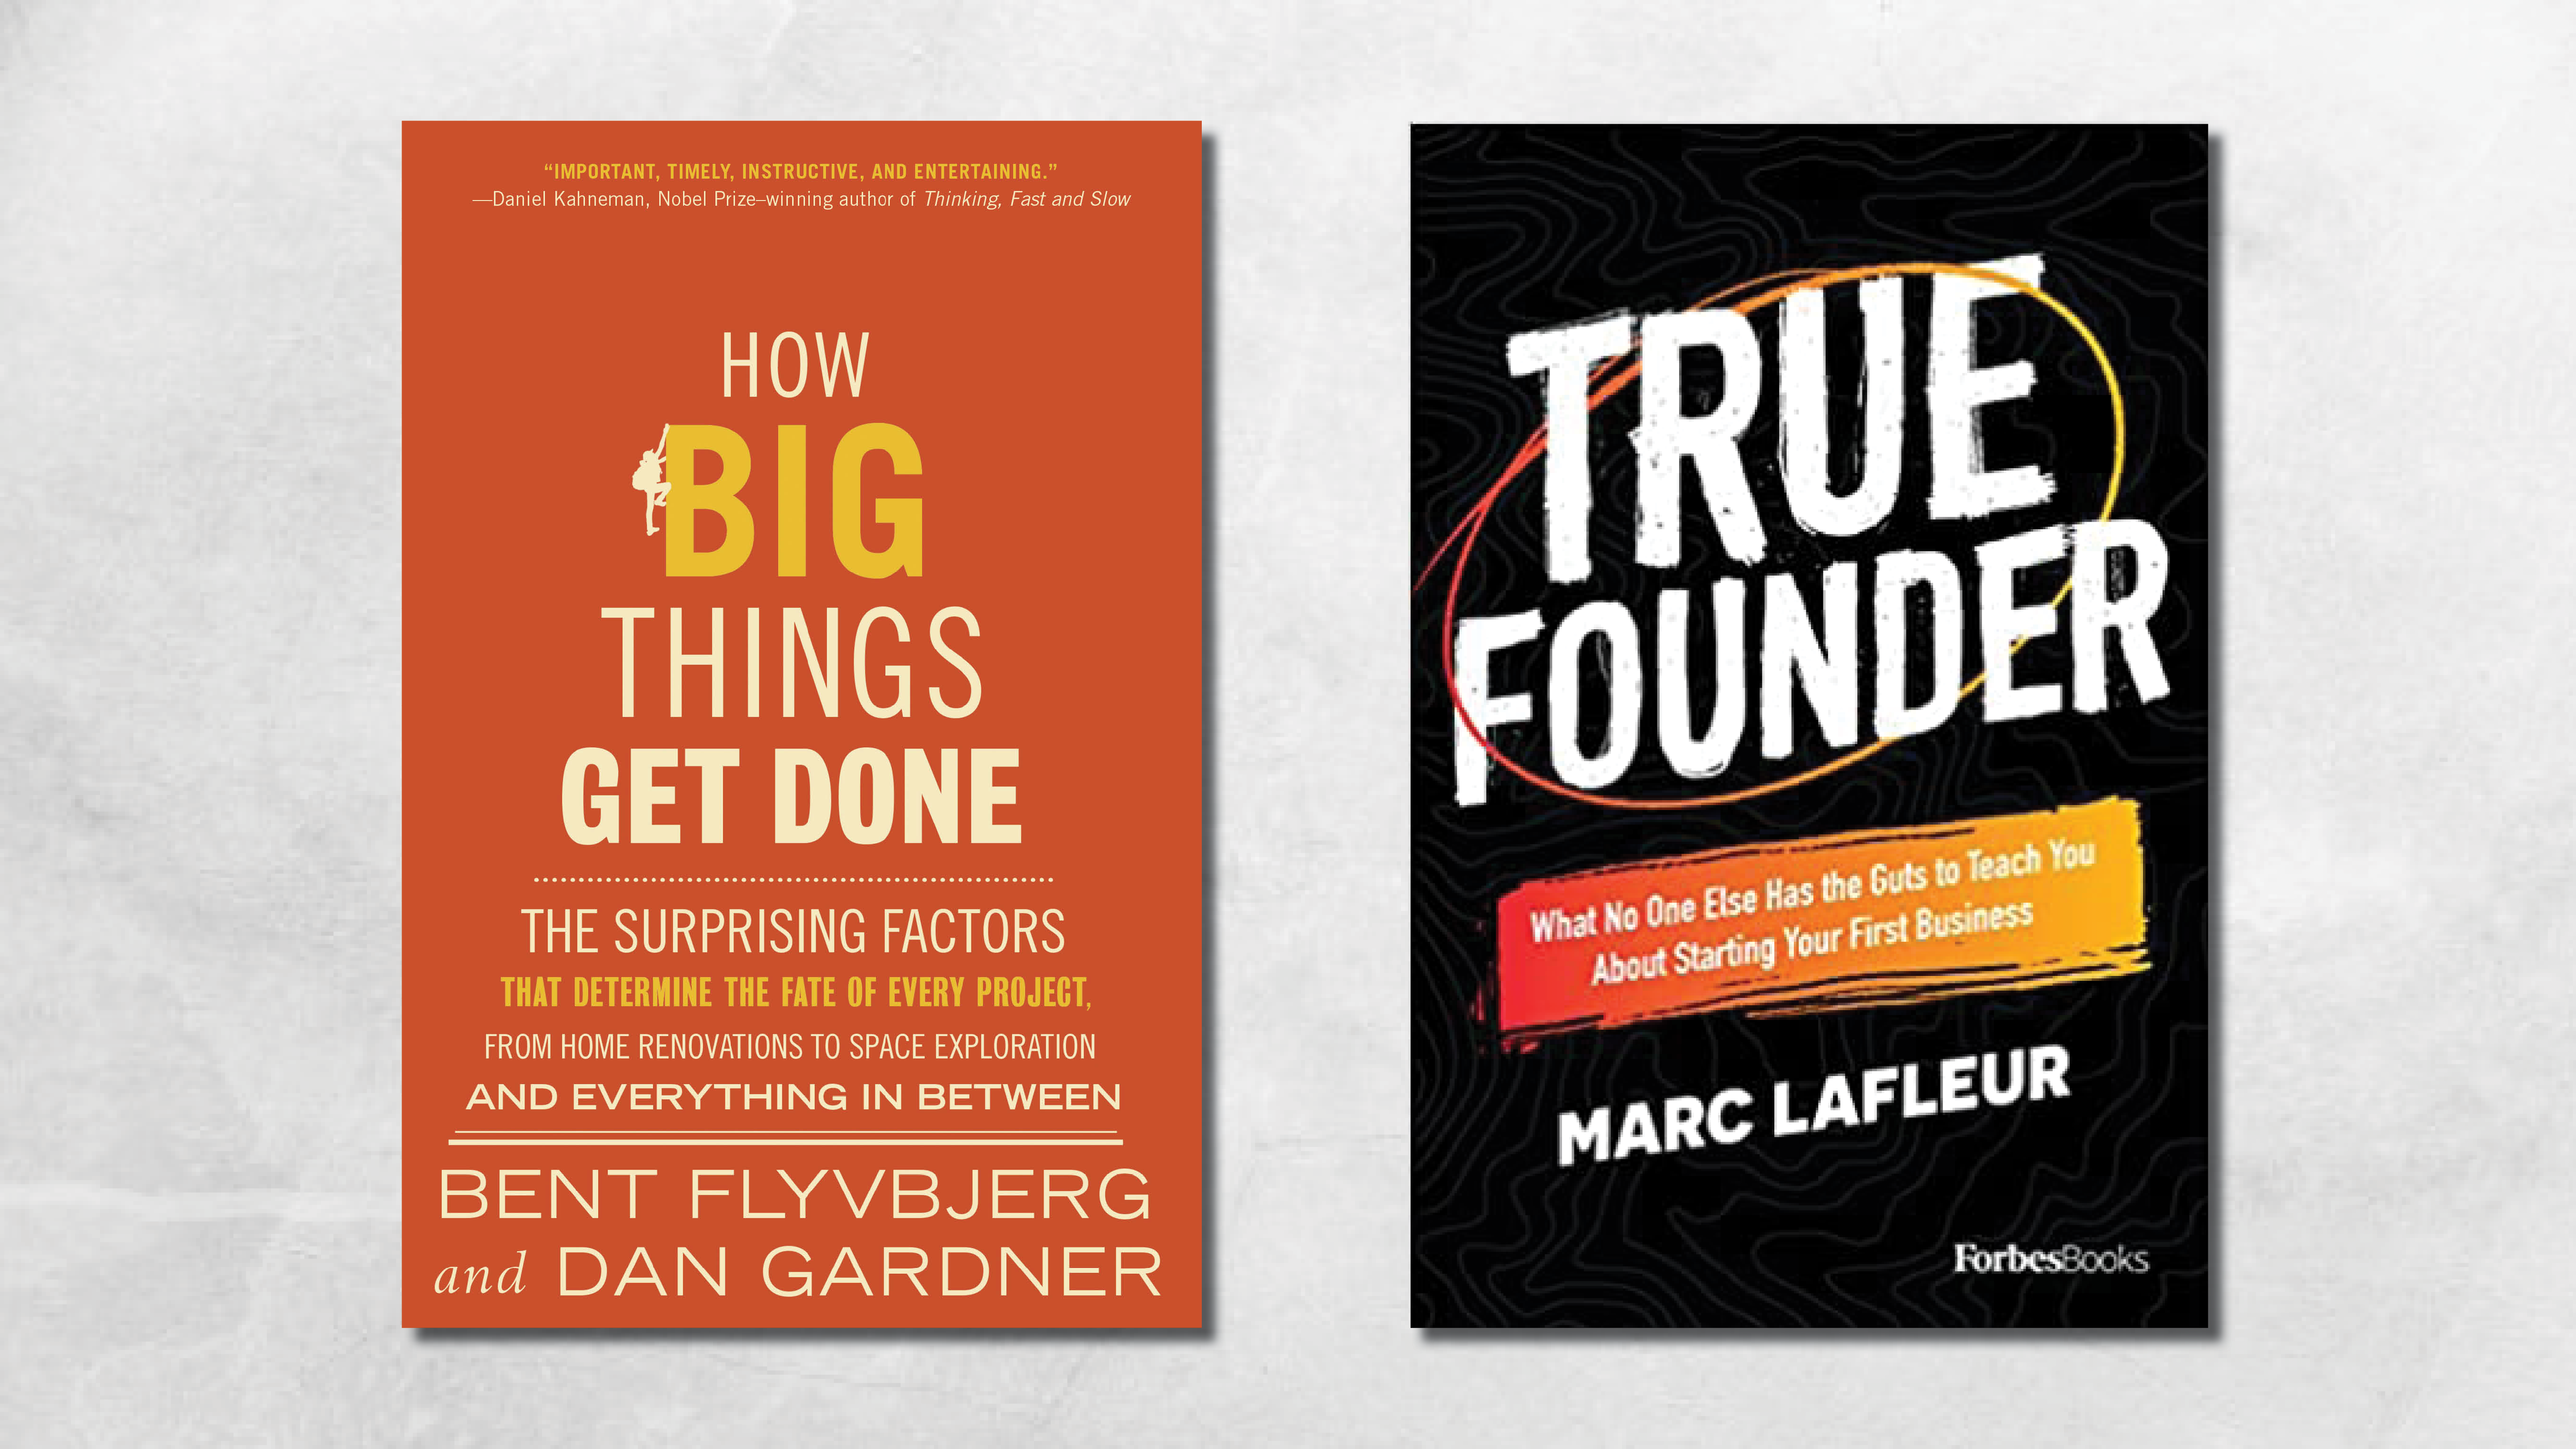 Book covers of How Big Things Get Done and True Founder